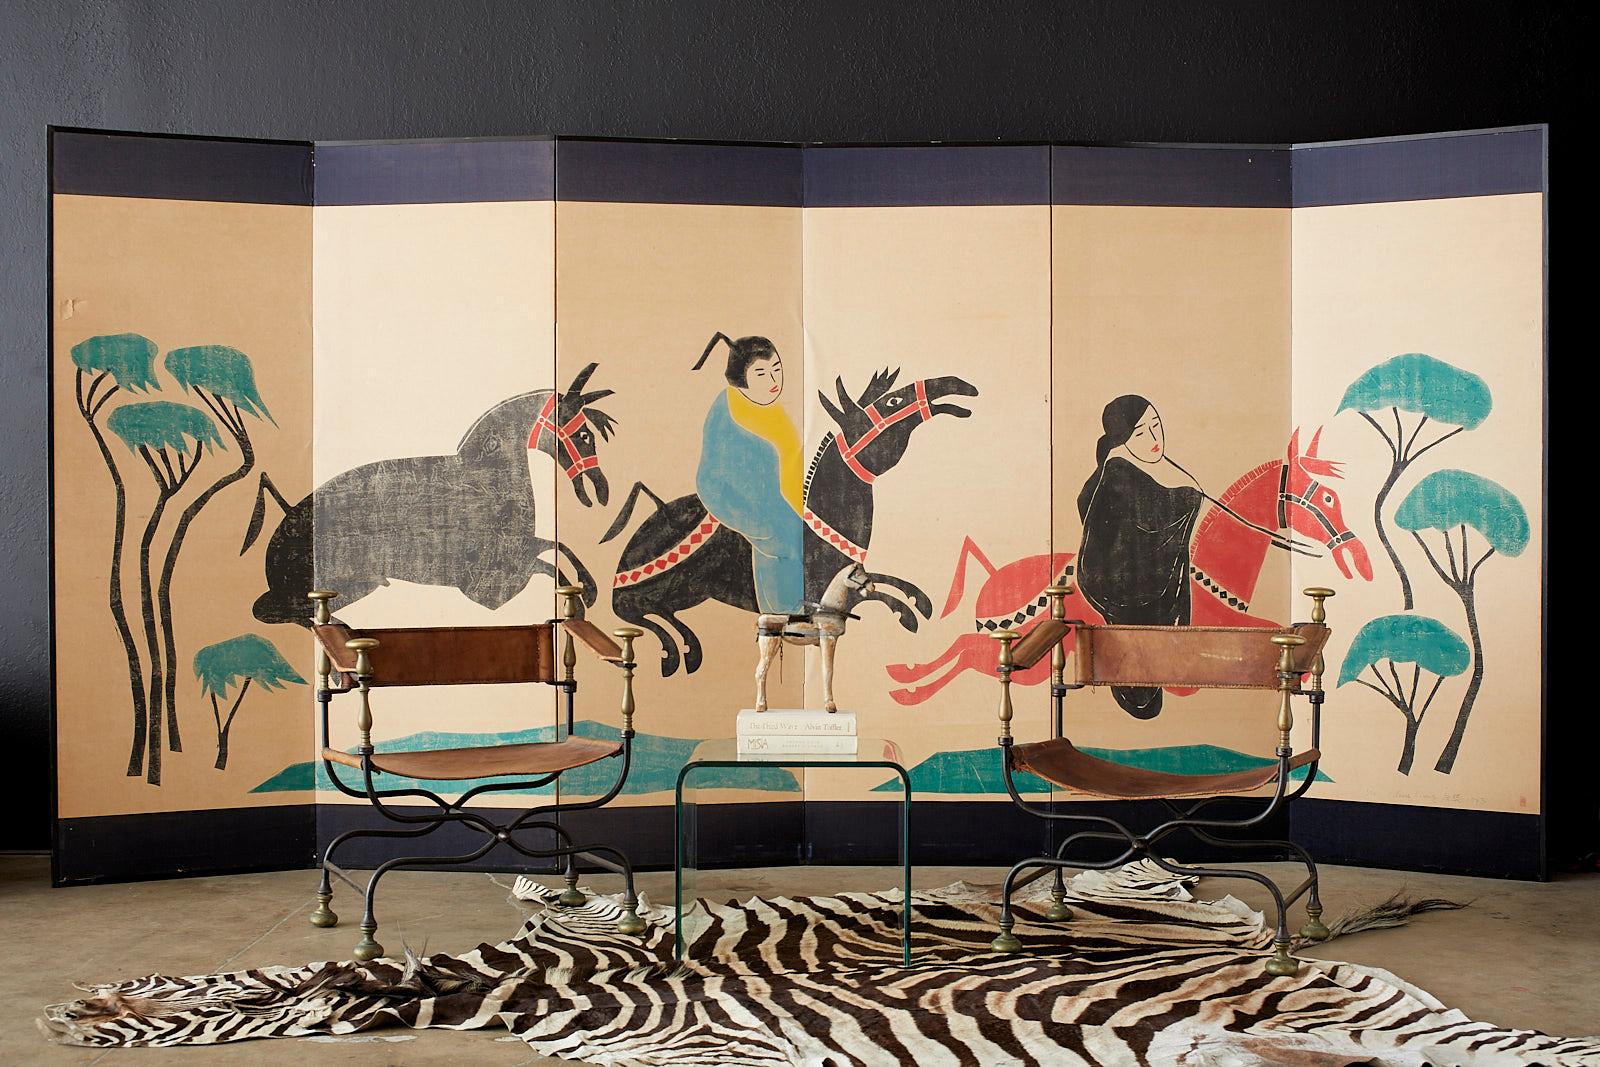 Monumental Chinese woodblock print by Louis Liang. Modern style six-panel depicting figures on horseback with ink and vibrant color pigments on handcrafted paper. Set in a large ebonized wood frame with a silk brocade border on top and bottom.